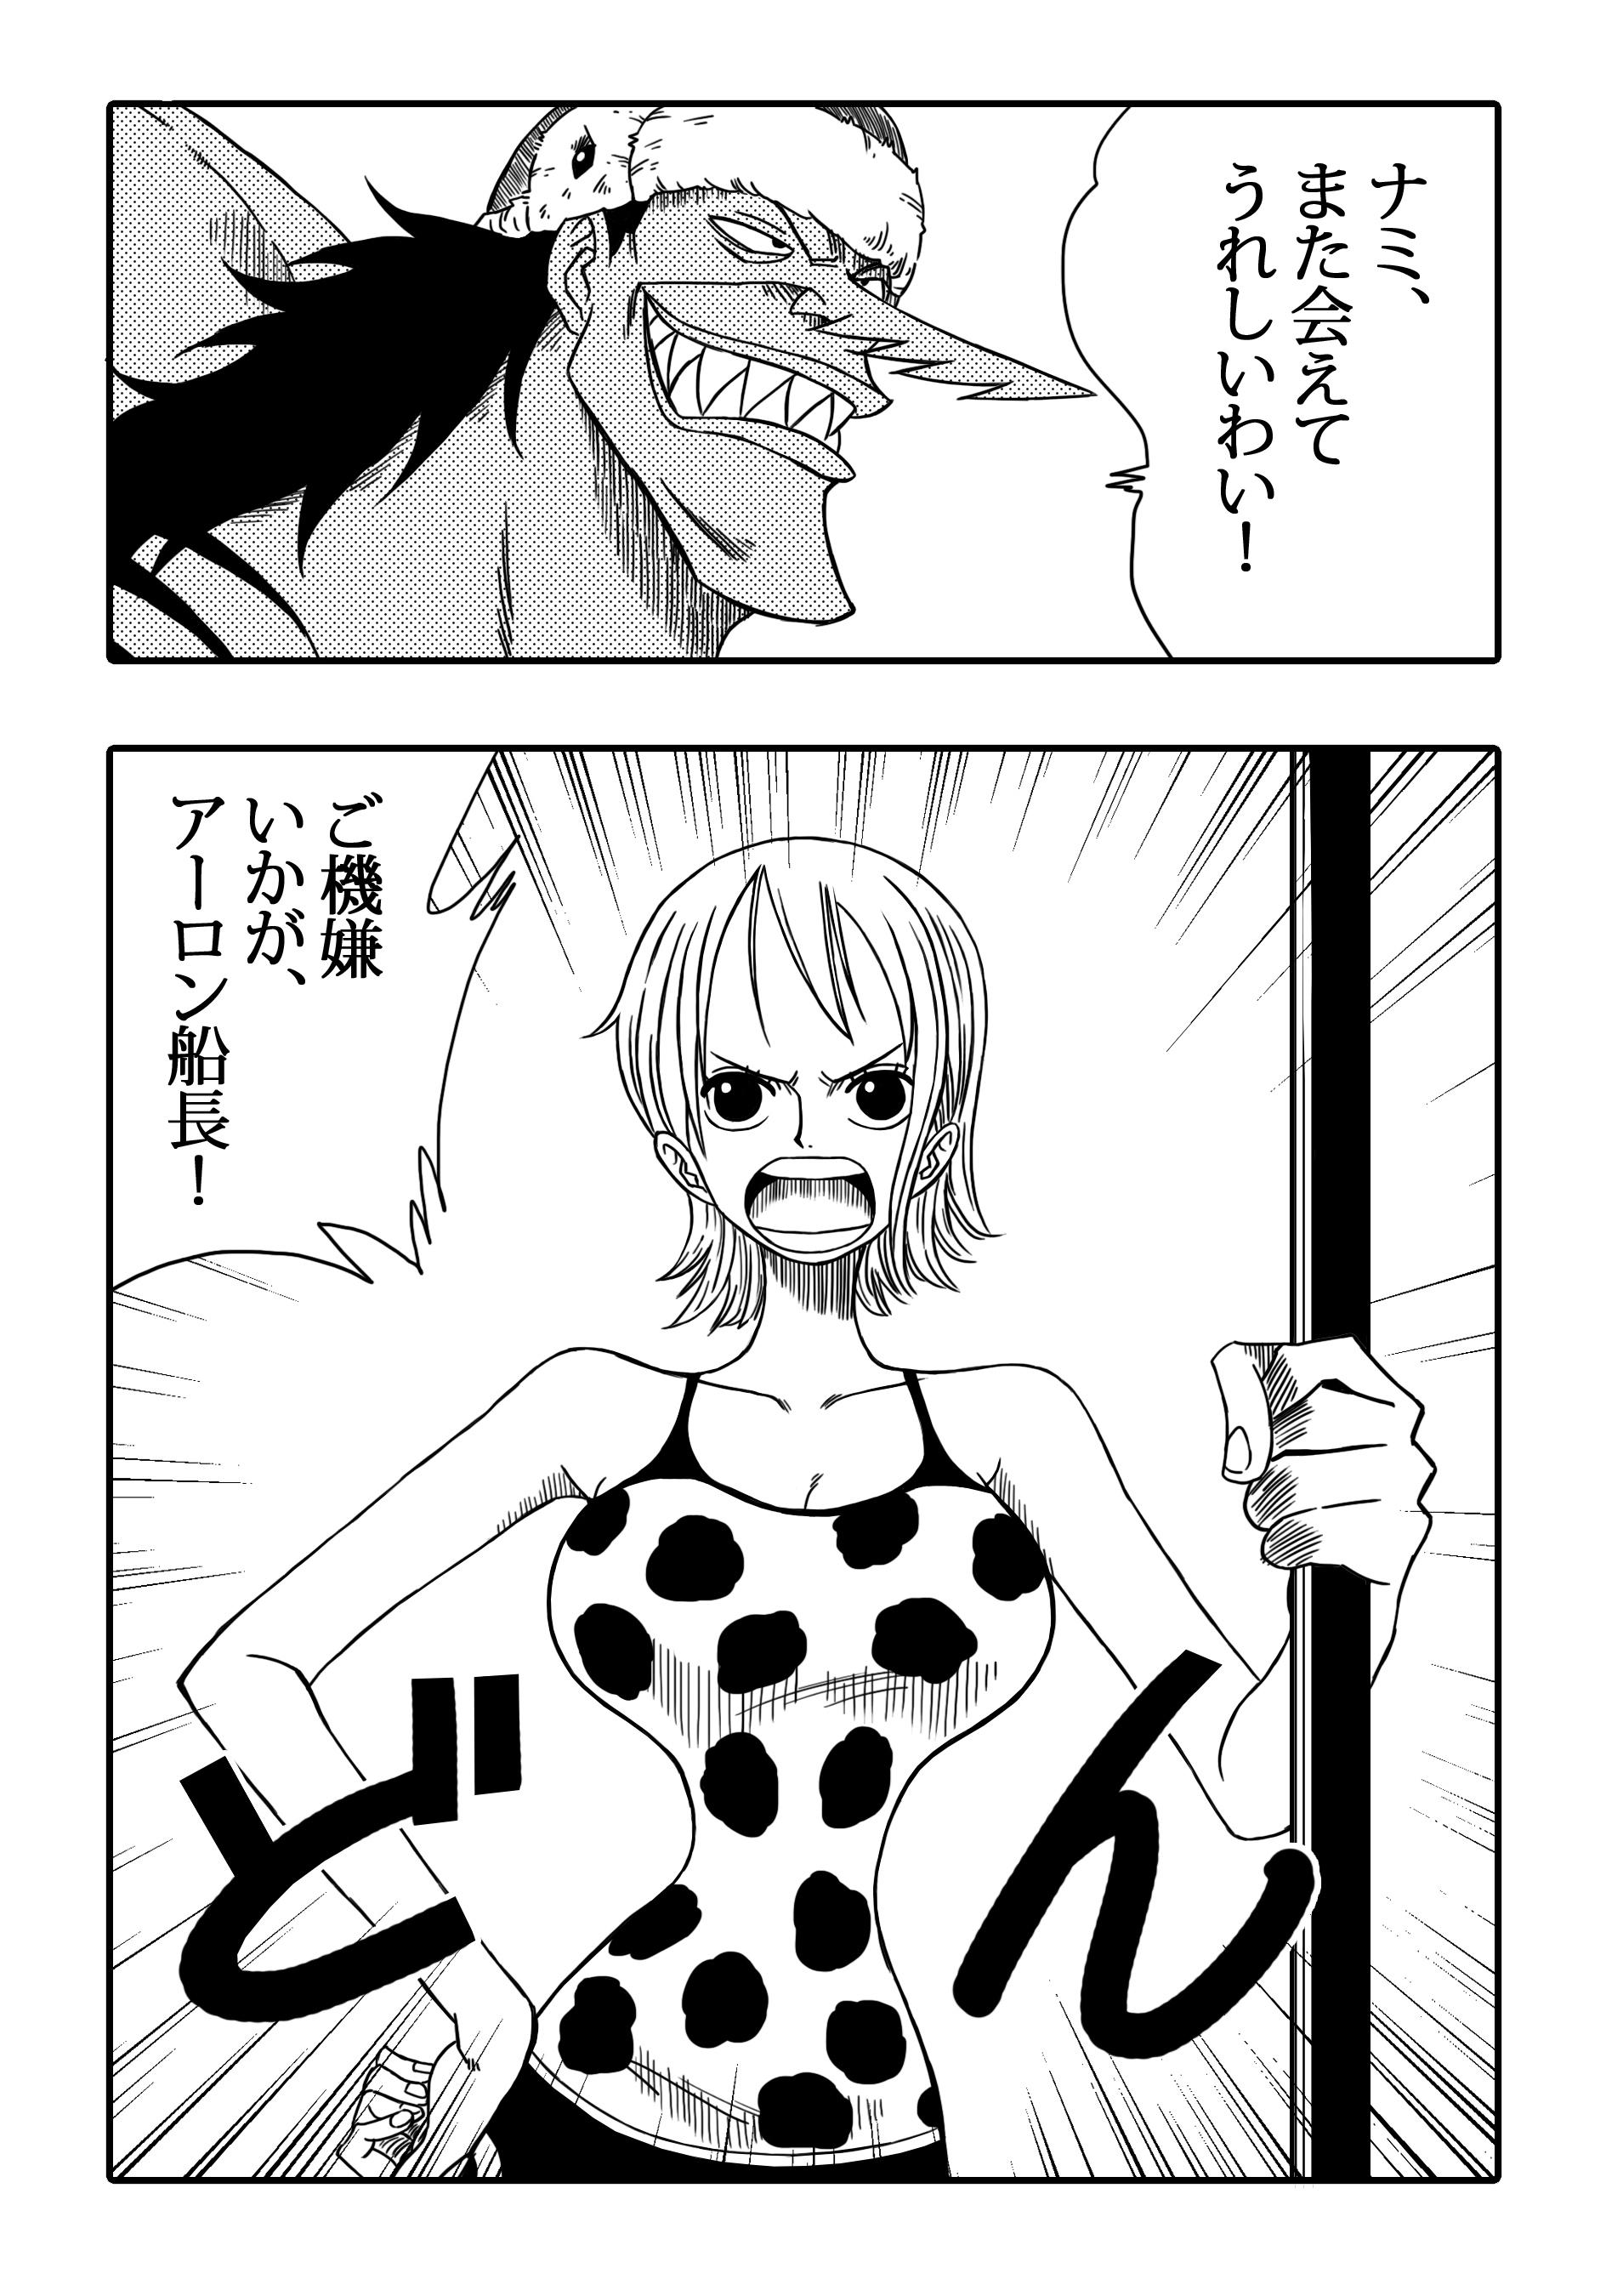 Escort Two Piece - Nami vs Arlong - One piece Cunt - Page 3